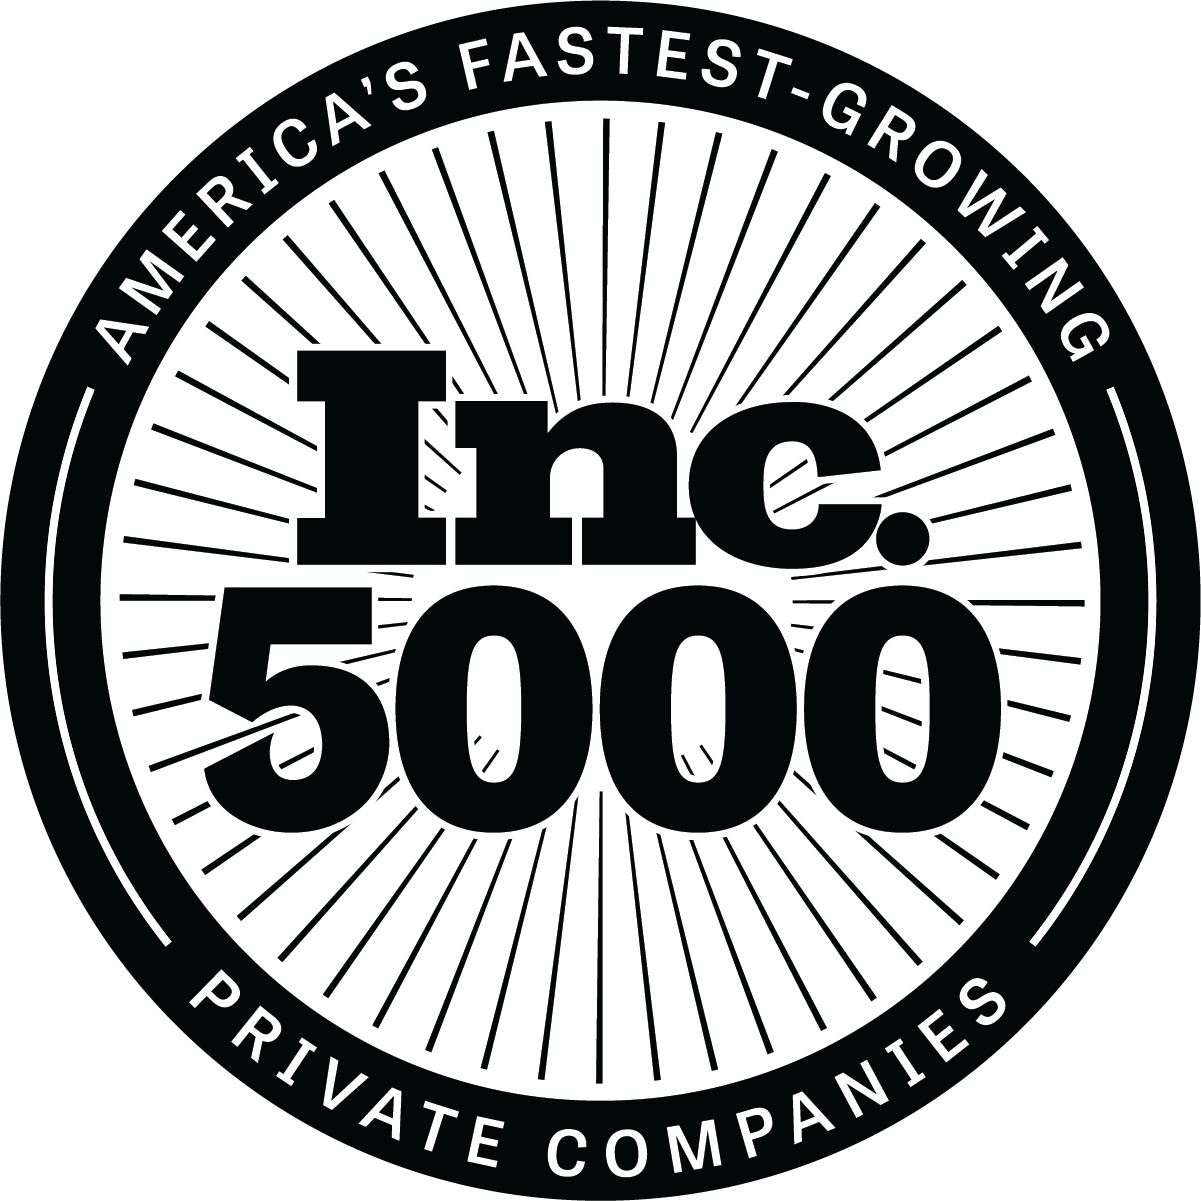 The Inc. 5000 Banner Image 